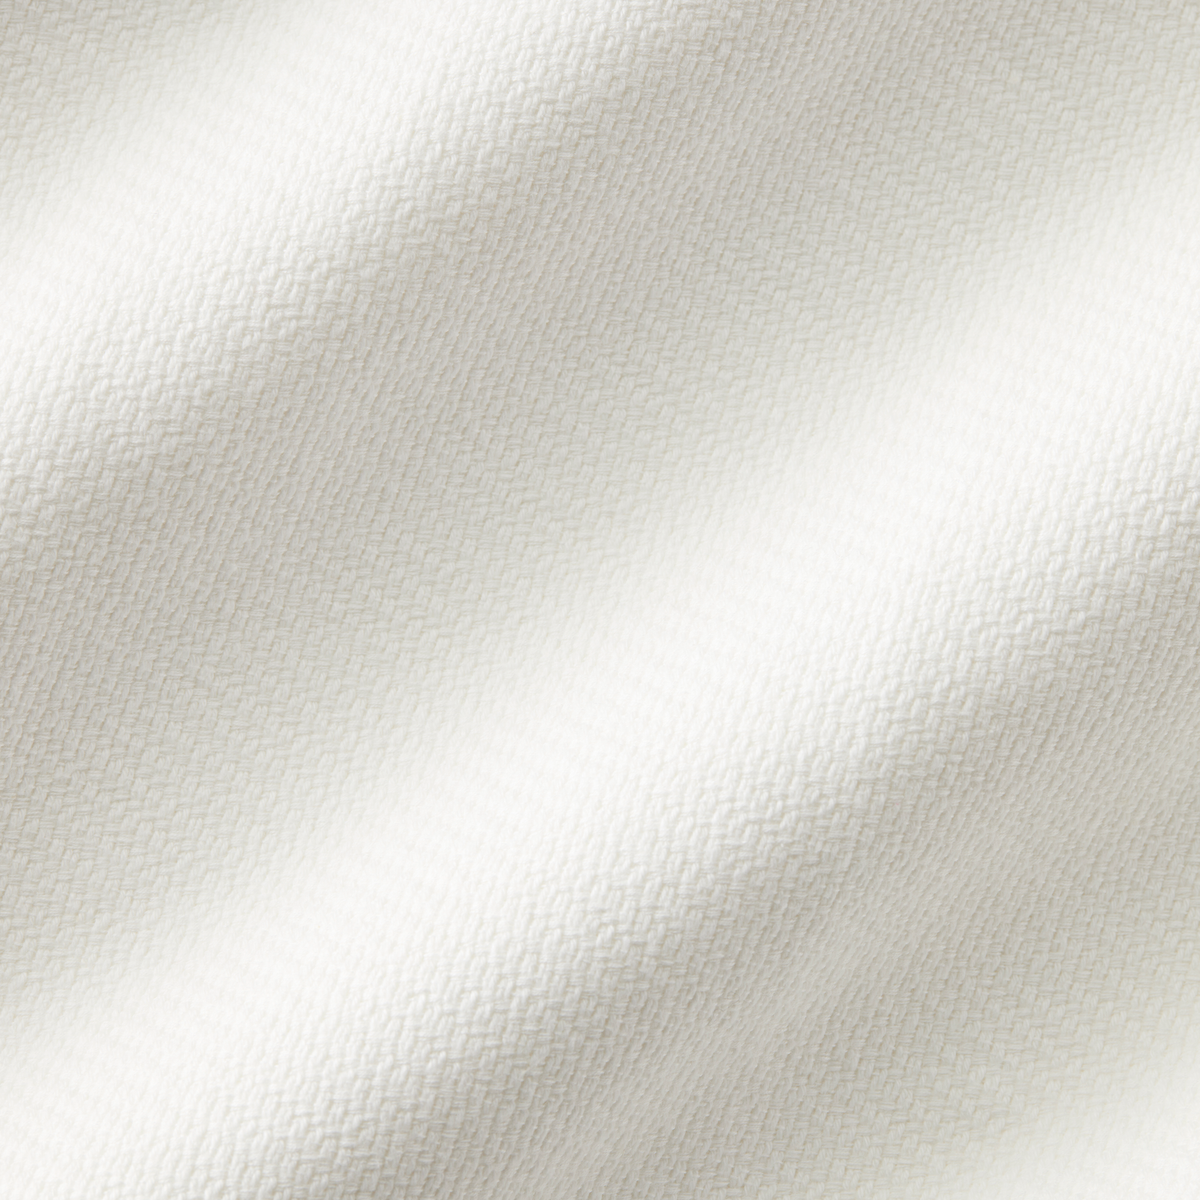 Fabric Texture of Sferra Allegra Blanket in Oyster Color